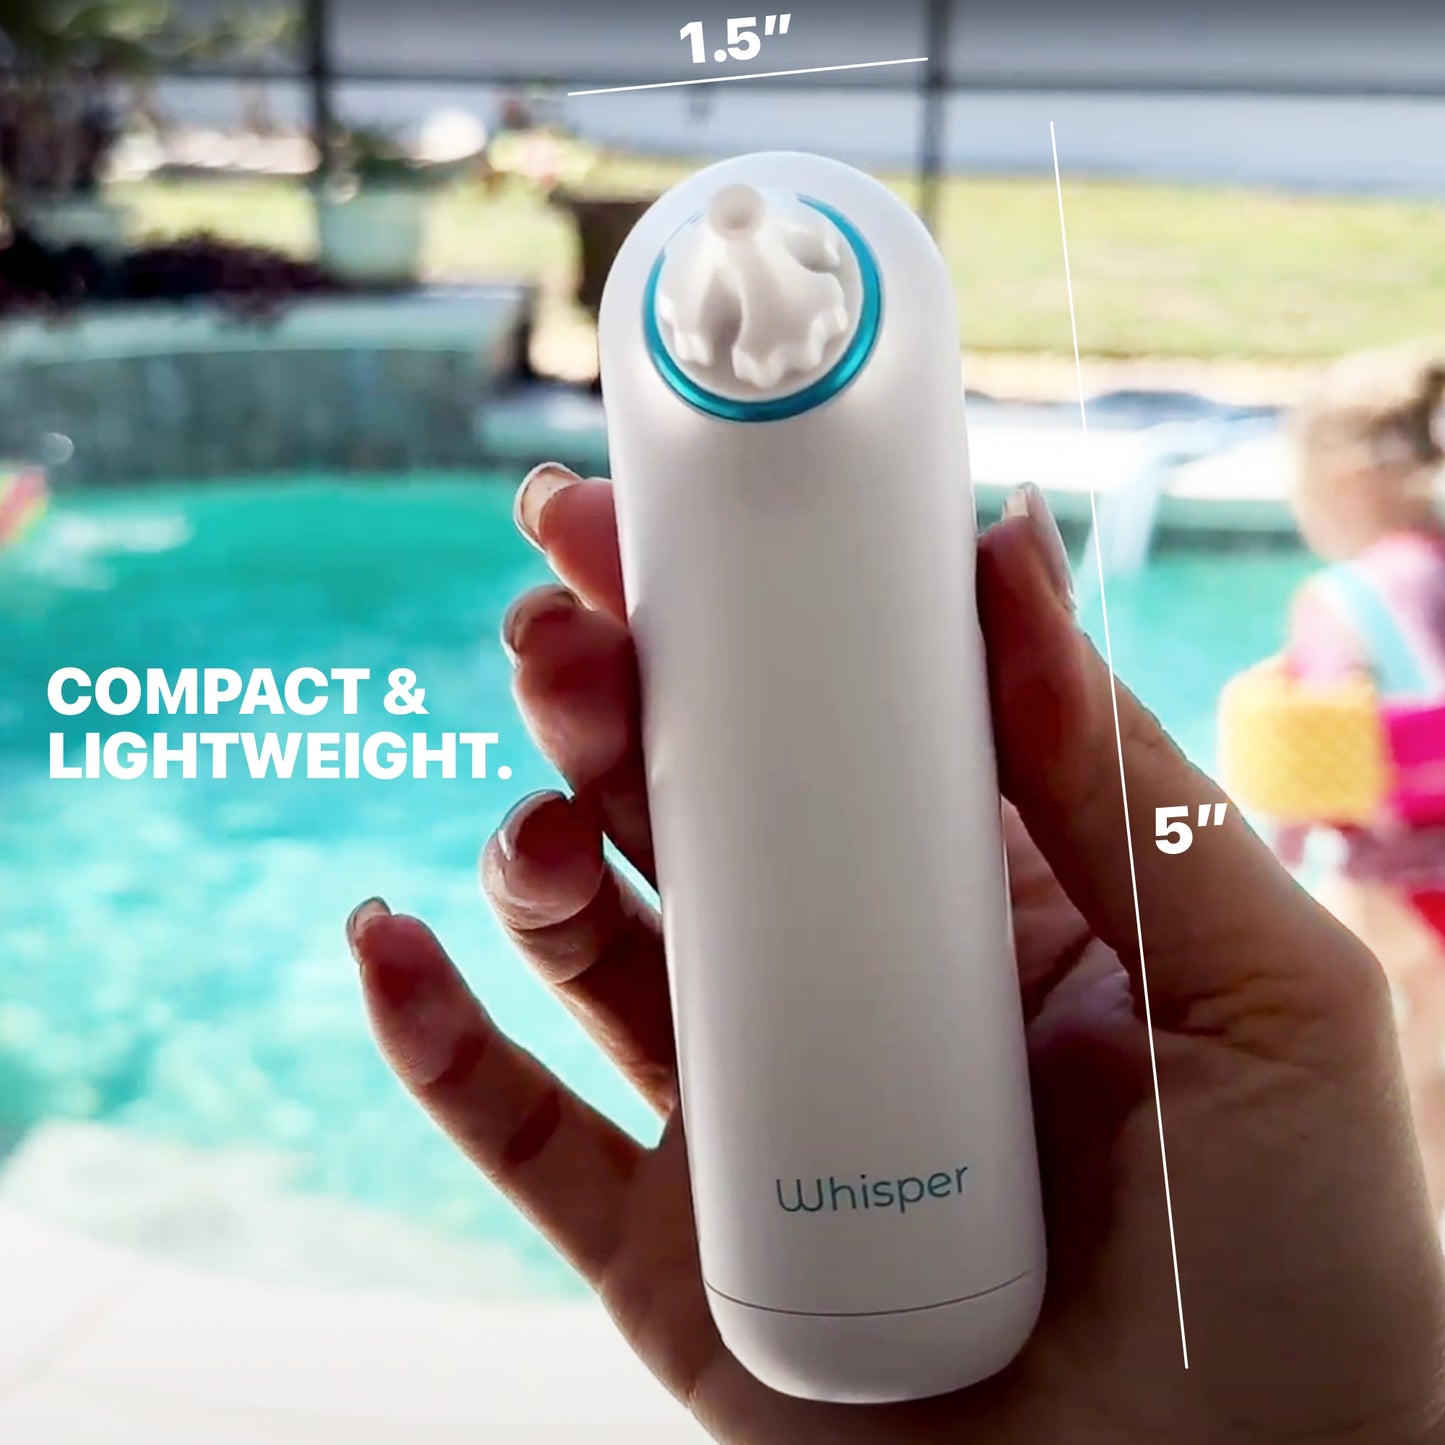 Whisper Ear Dryer dimensions (compact and portable)